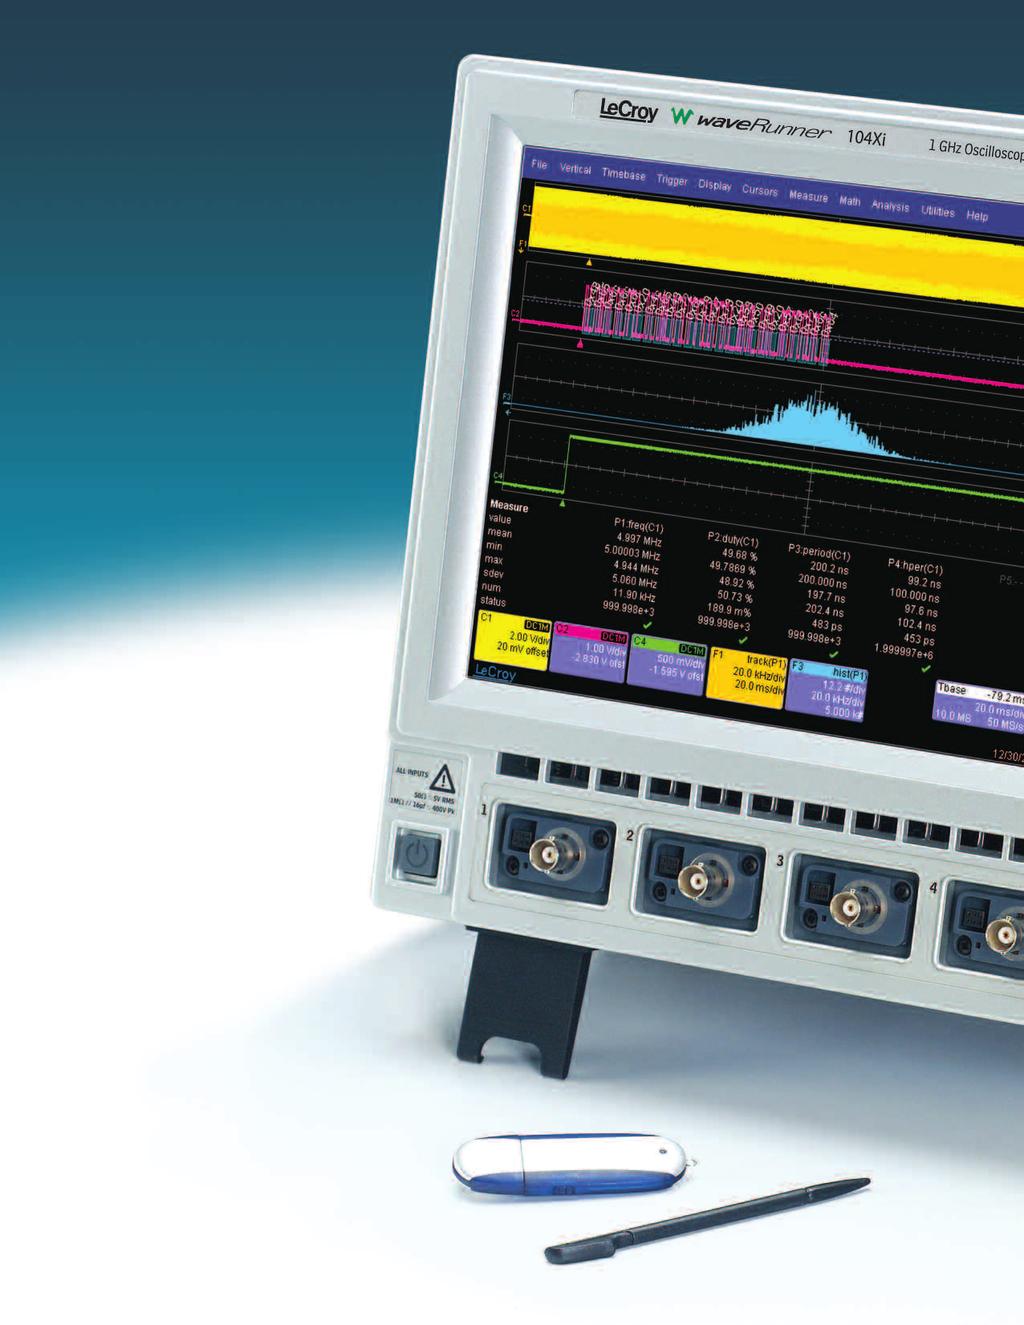 Outstanding Capabilities for Everyday Testing 8 LeCroy s out-of-the-box thinking about oscilloscopes provides a great form factor and no compromises.